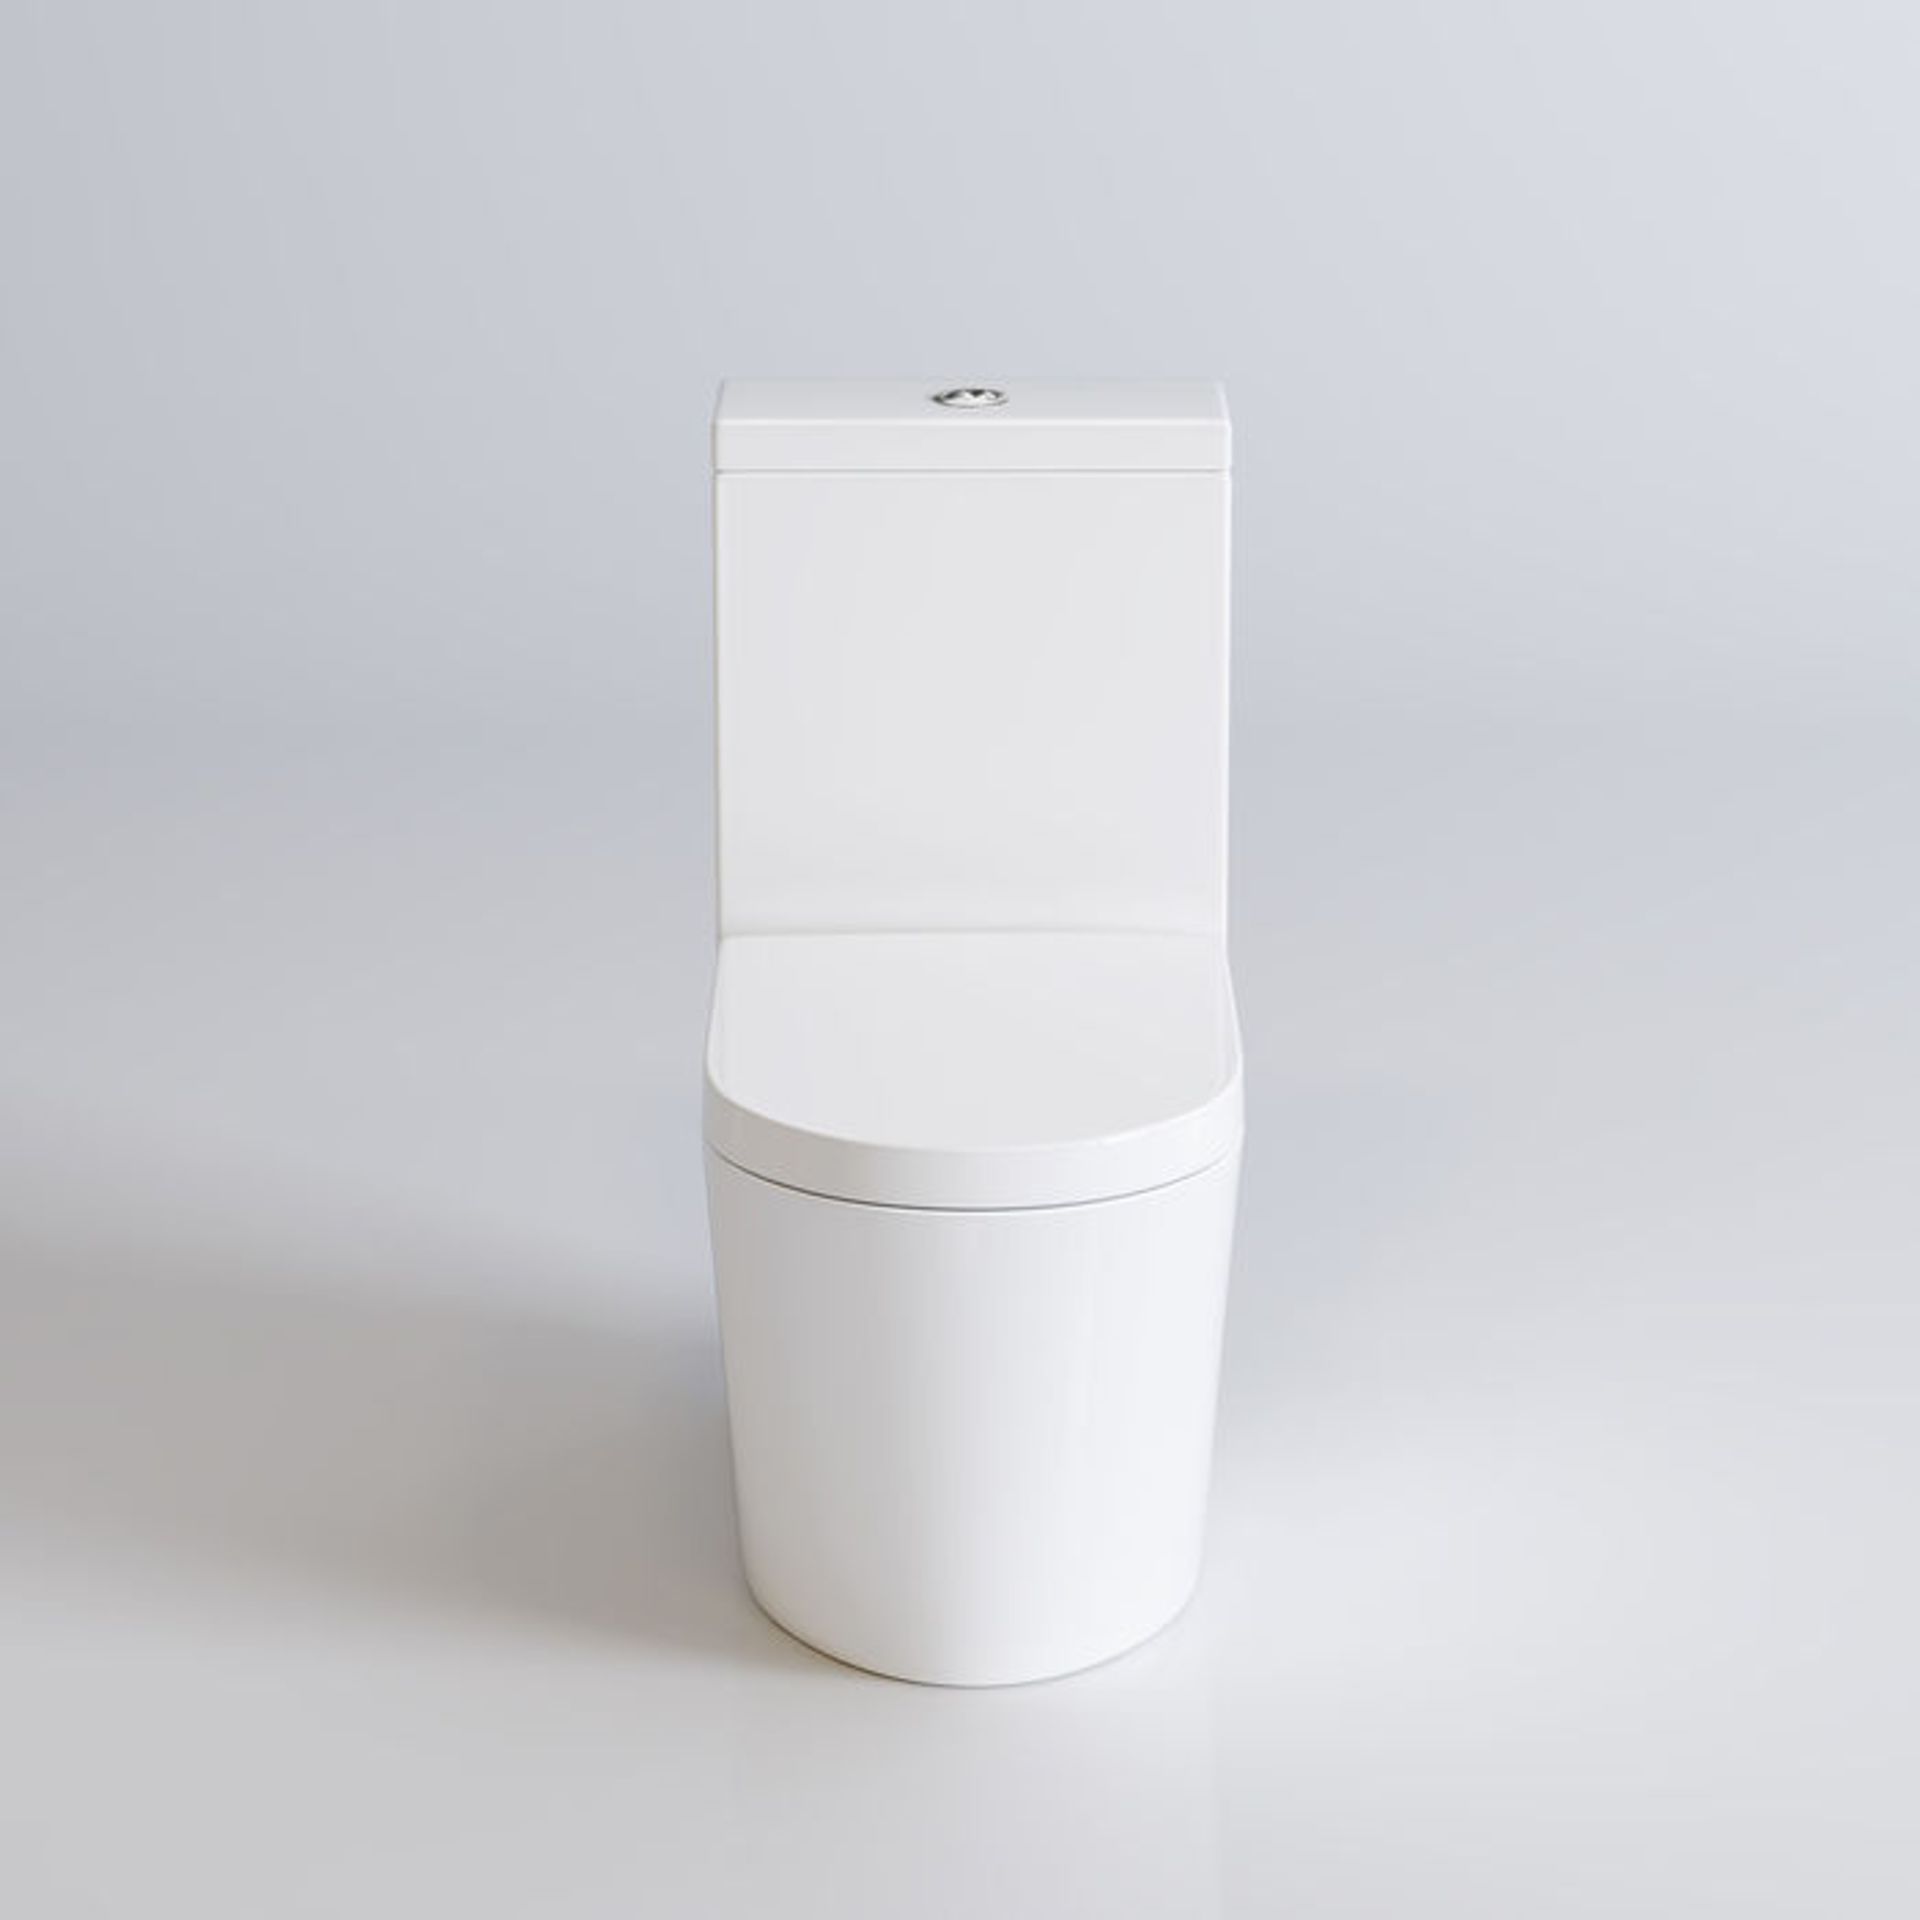 NEW & BOXED Lyon II Close Coupled Toilet & Cistern inc Luxury Soft Close Seat. RRP £499.99. 63... - Image 4 of 4